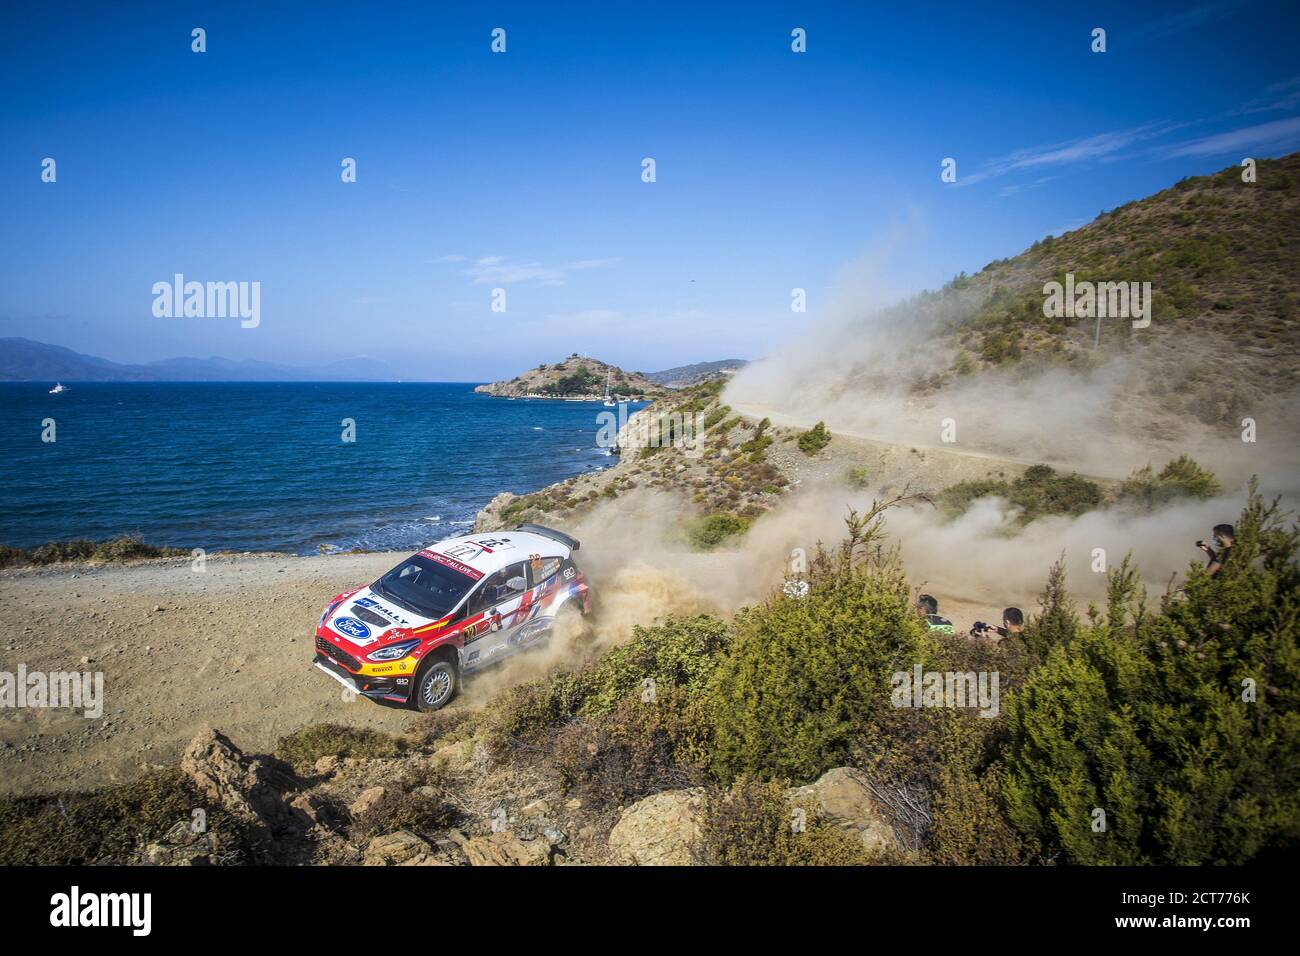 32 SARRAZIN Stephane, PARENT Kevin, Hyundai i20 R5, WRC 3, action during the 2020 Rally of Turkey, 5th round of the 2020 FIA WRC Championship from Sep Stock Photo